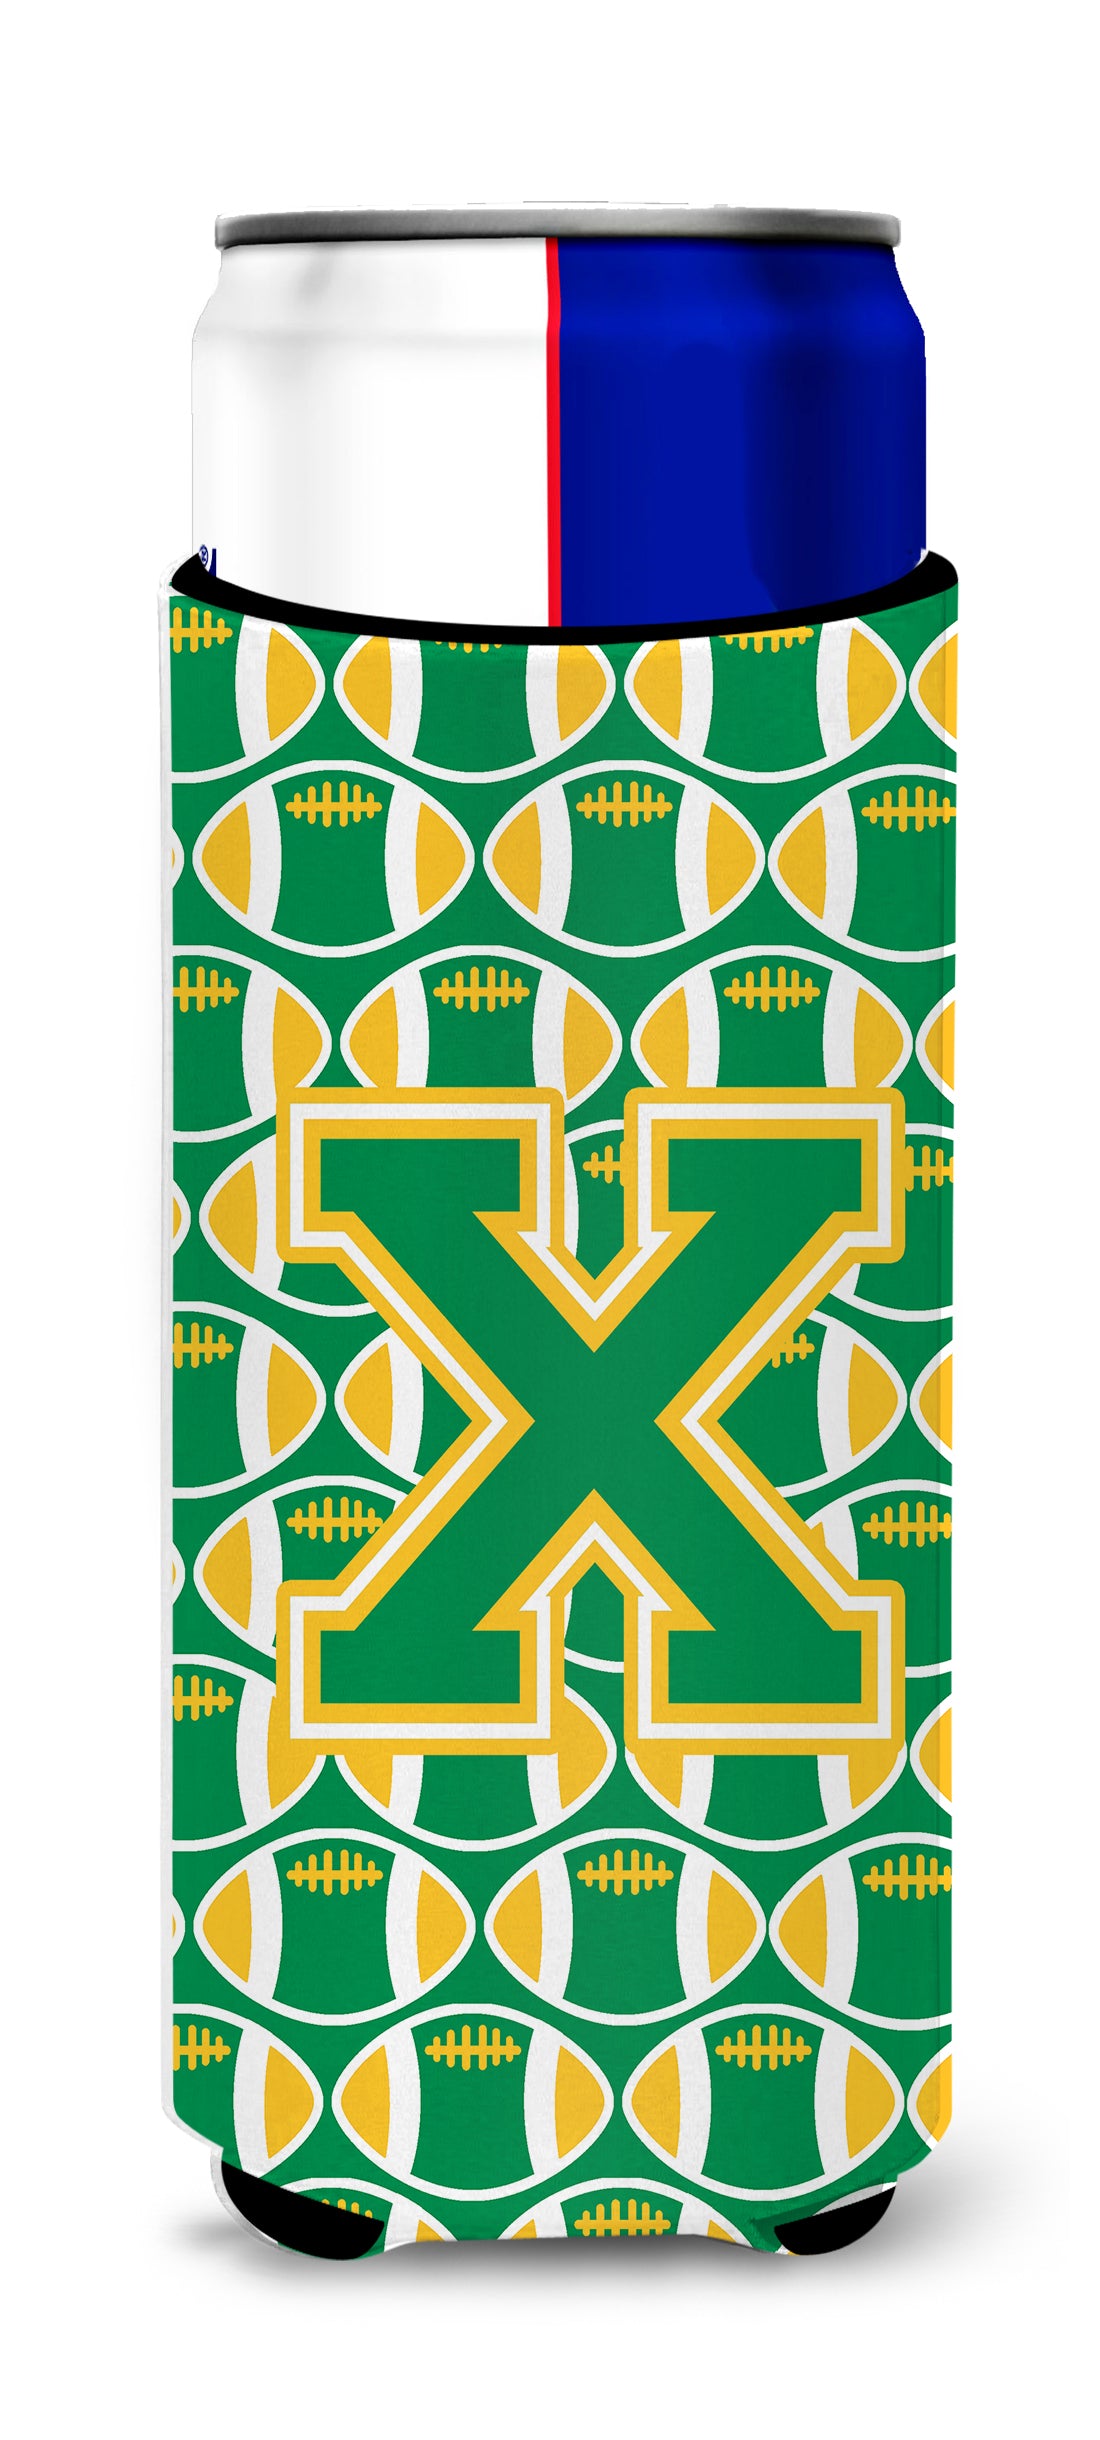 Letter X Football Green and Gold Ultra Beverage Insulators for slim cans CJ1069-XMUK